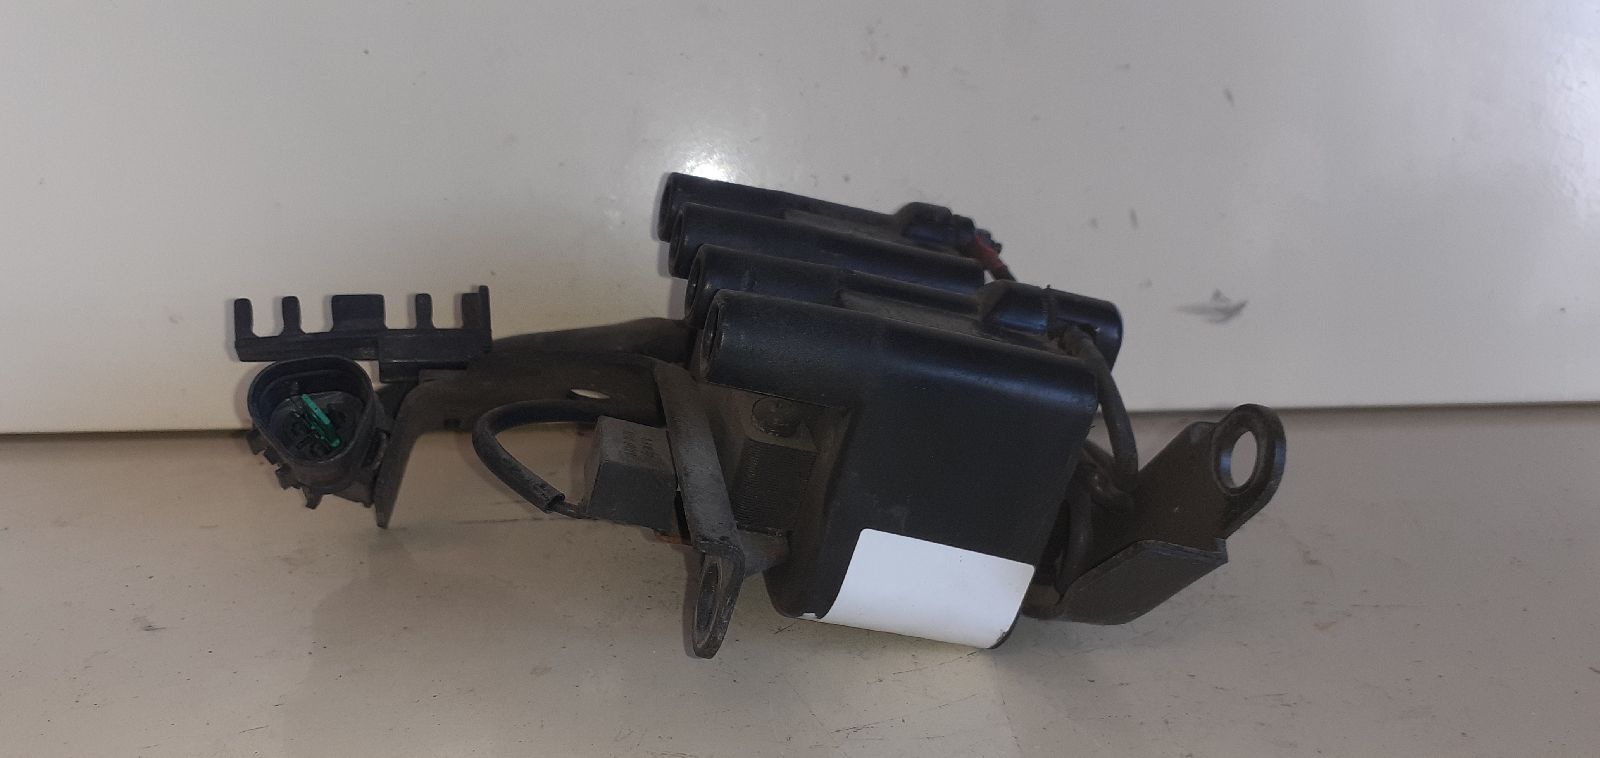 MAZDA Joice 1 generation (2000-2002) High Voltage Ignition Coil 2780133510 25280817